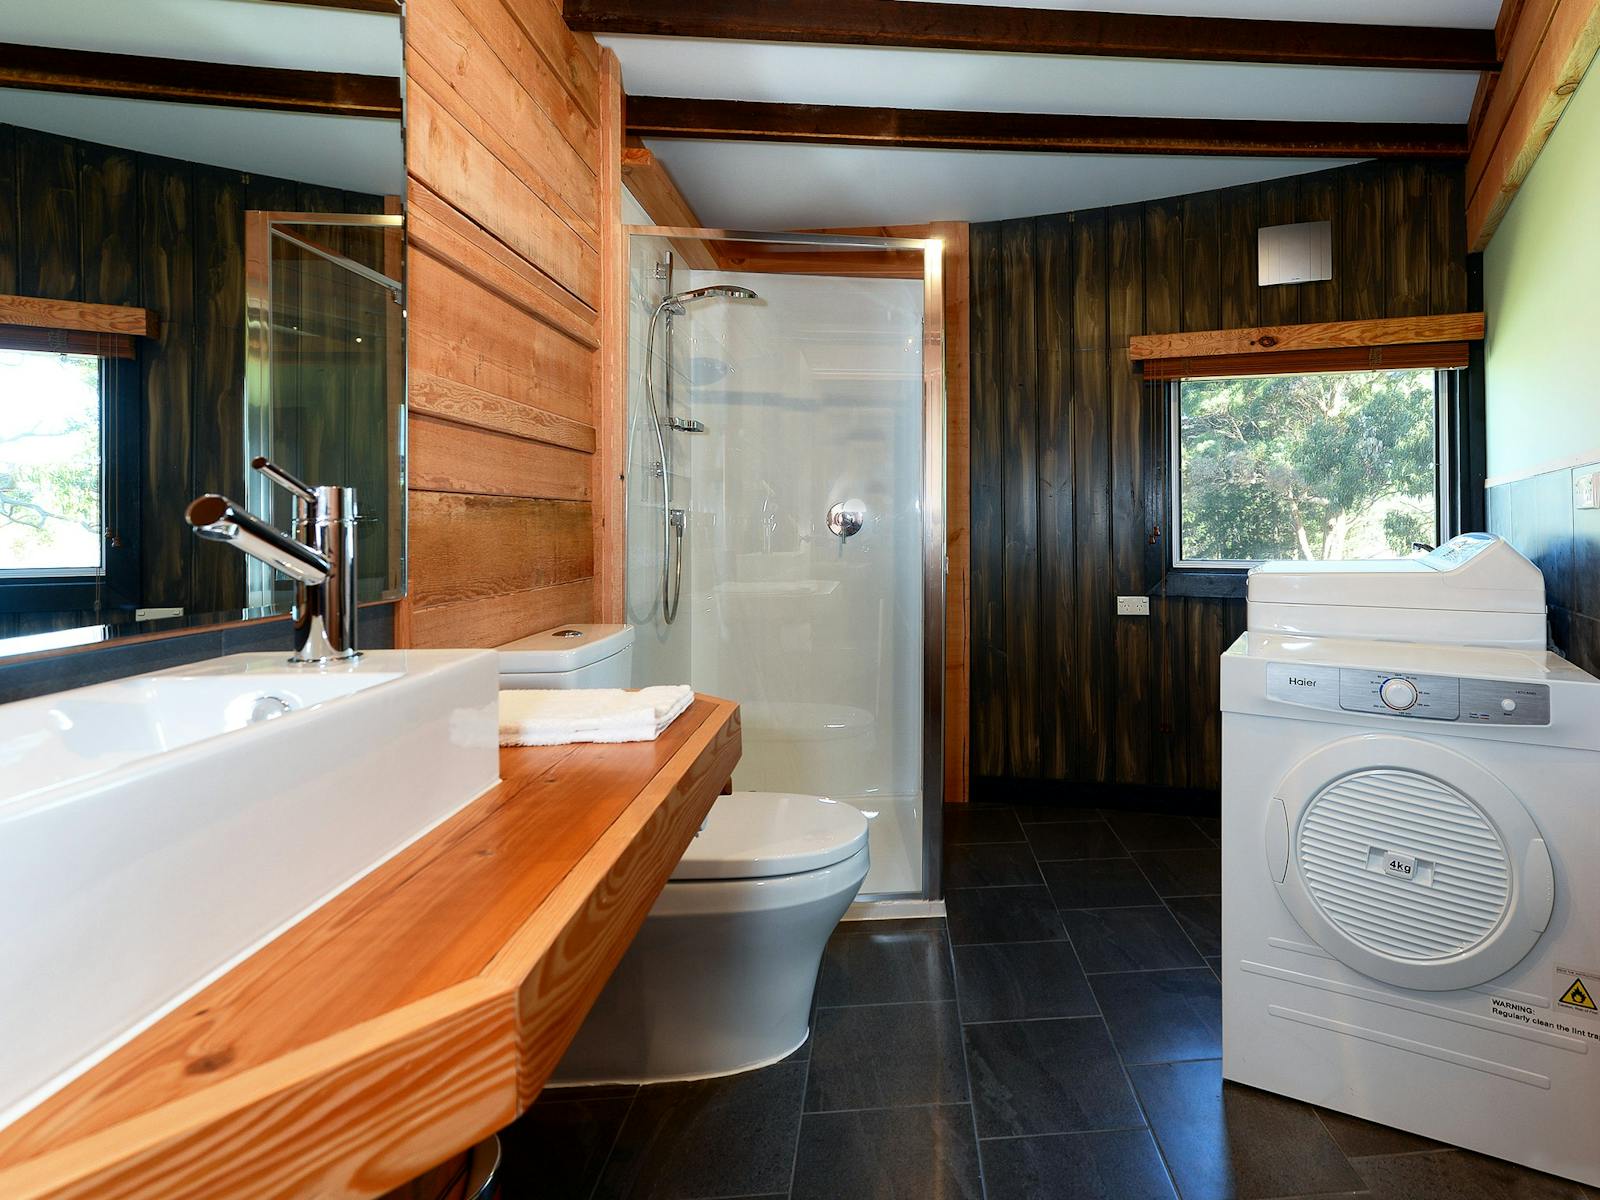 Taylors Bay Cottage:  bathroom and laundry facilities.